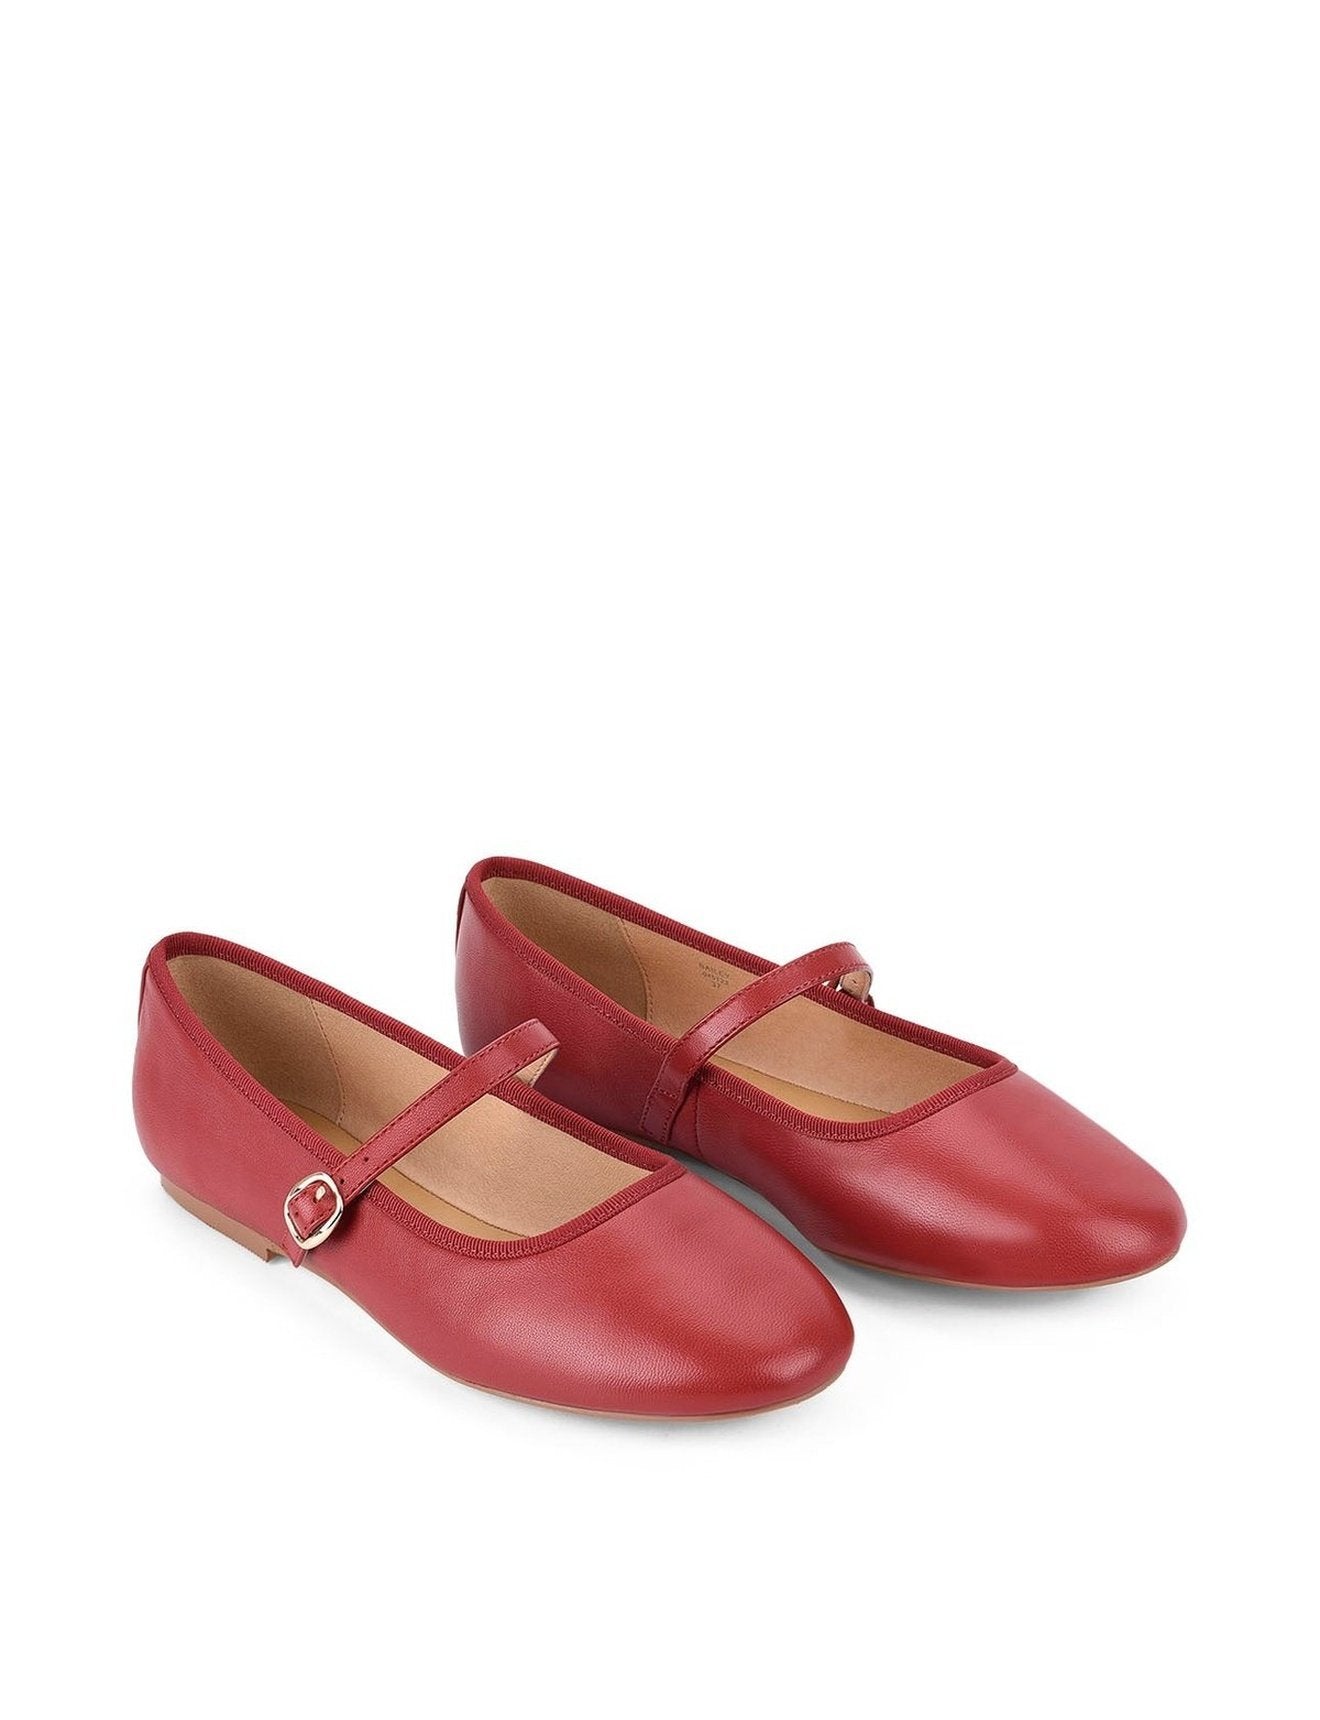 Bailey Flats - Red Leather